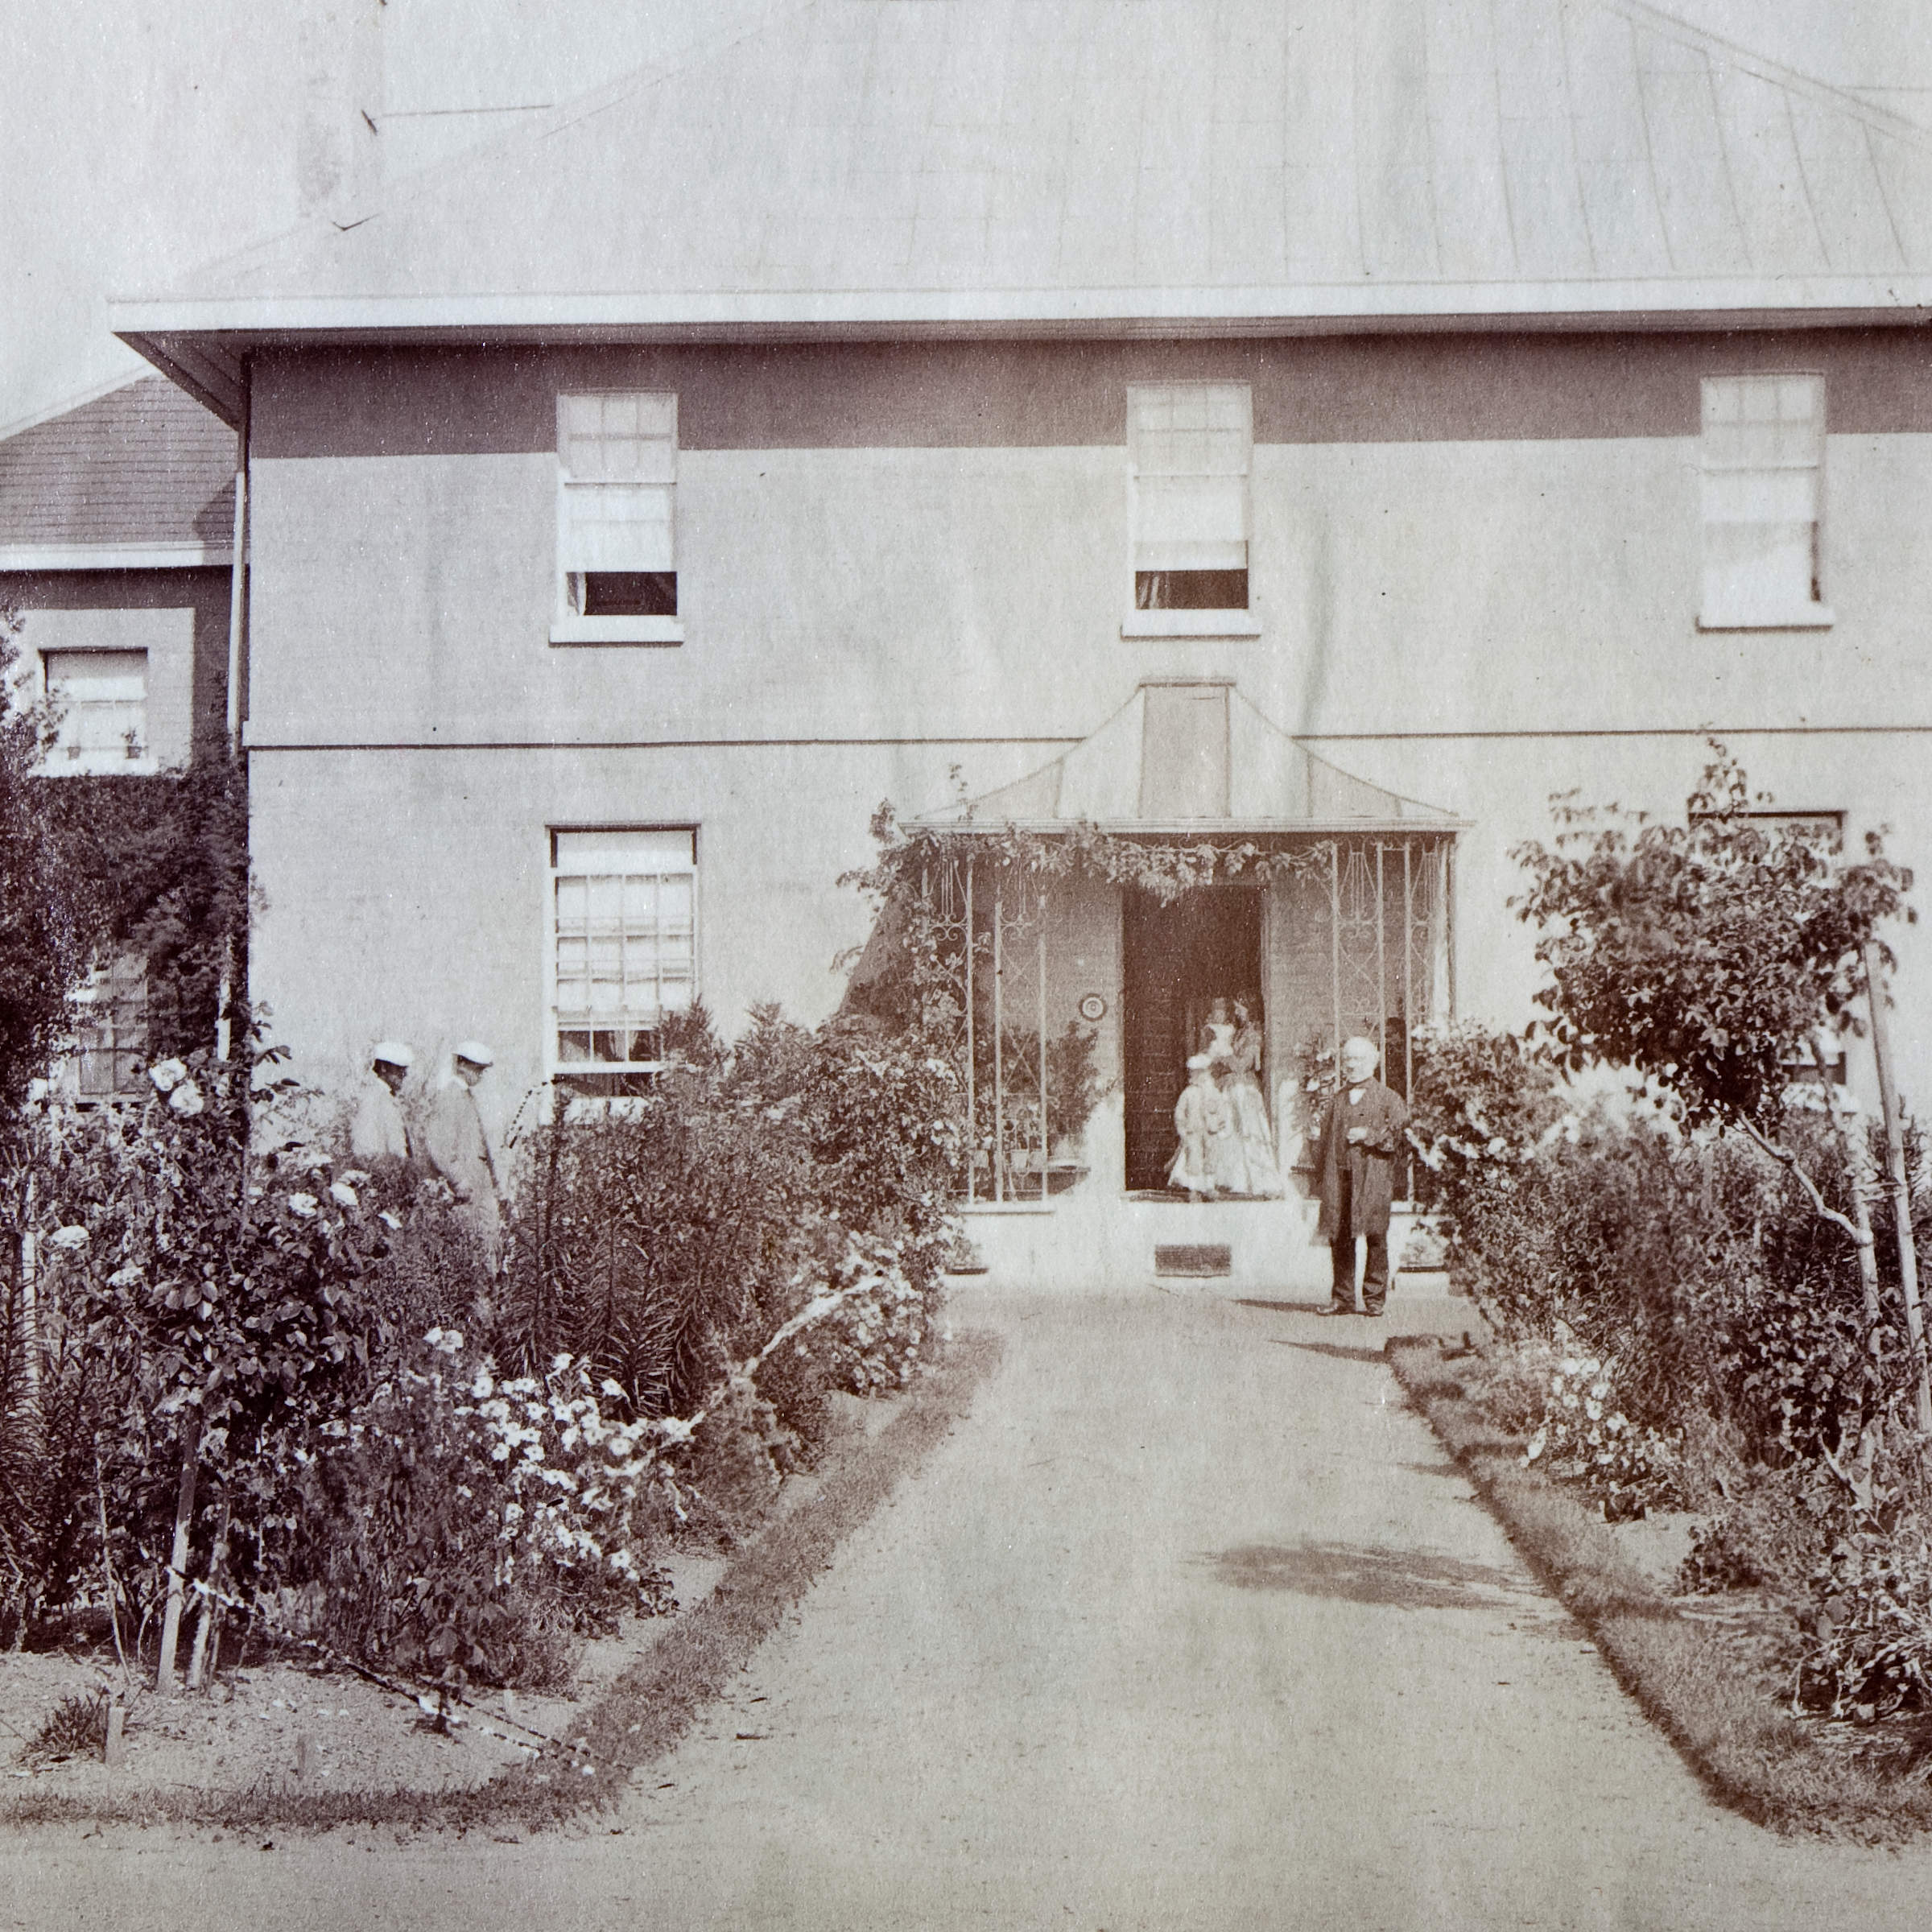 Brickendon Georgian homestead with the first William Archer standing in front of house and family members in the background. Rose gardens with a path in the centre, lead to the house with a greenhouse to the left. Source:Brickendon Estate Archive.